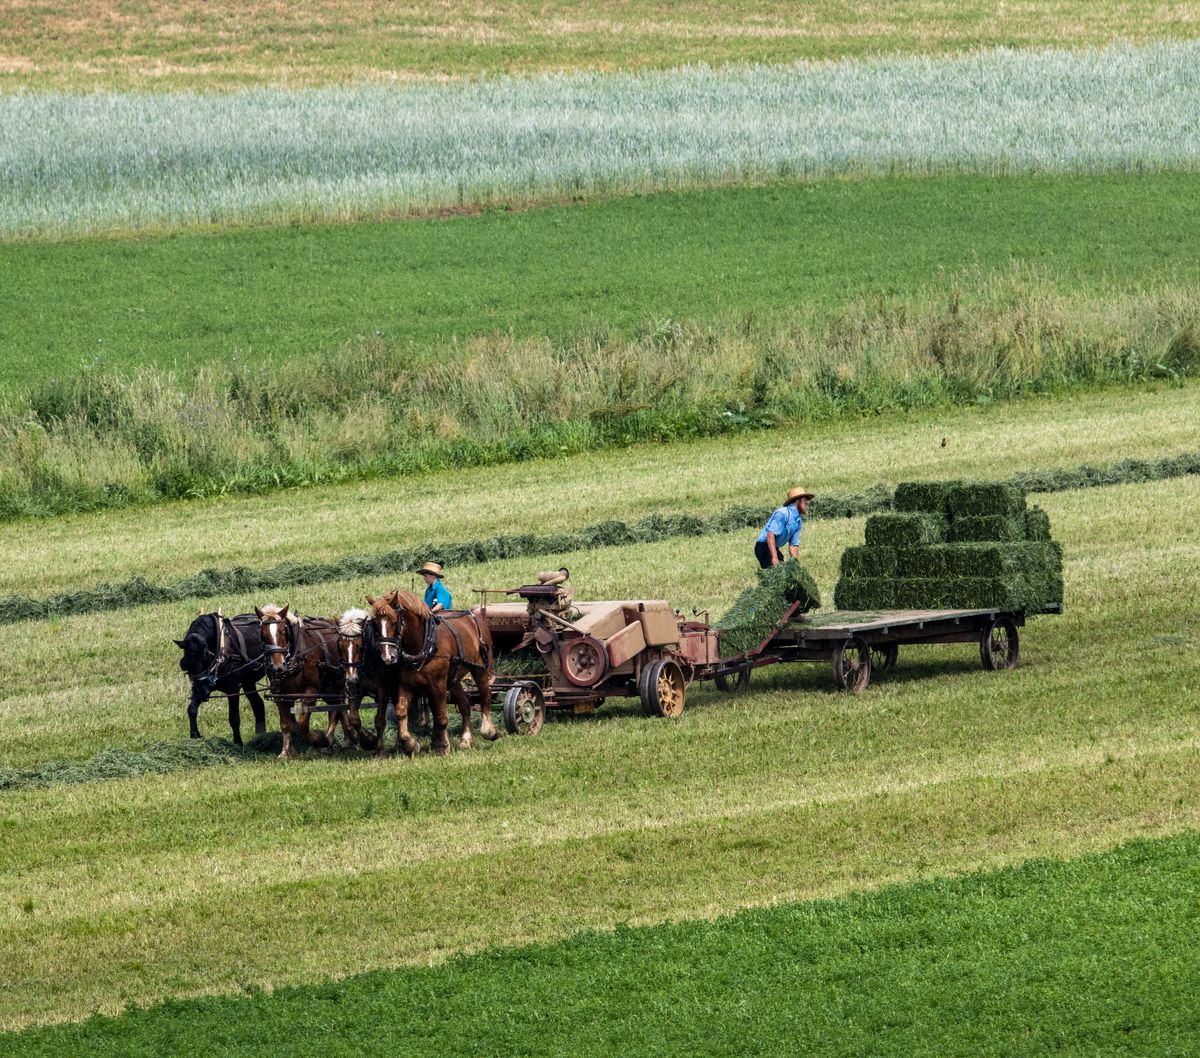 Amish farmers working in a green field, baling hay with horse-drawn equipment. Several horses are hitched to the machinery, while one farmer stacks hay bales on a trailer.